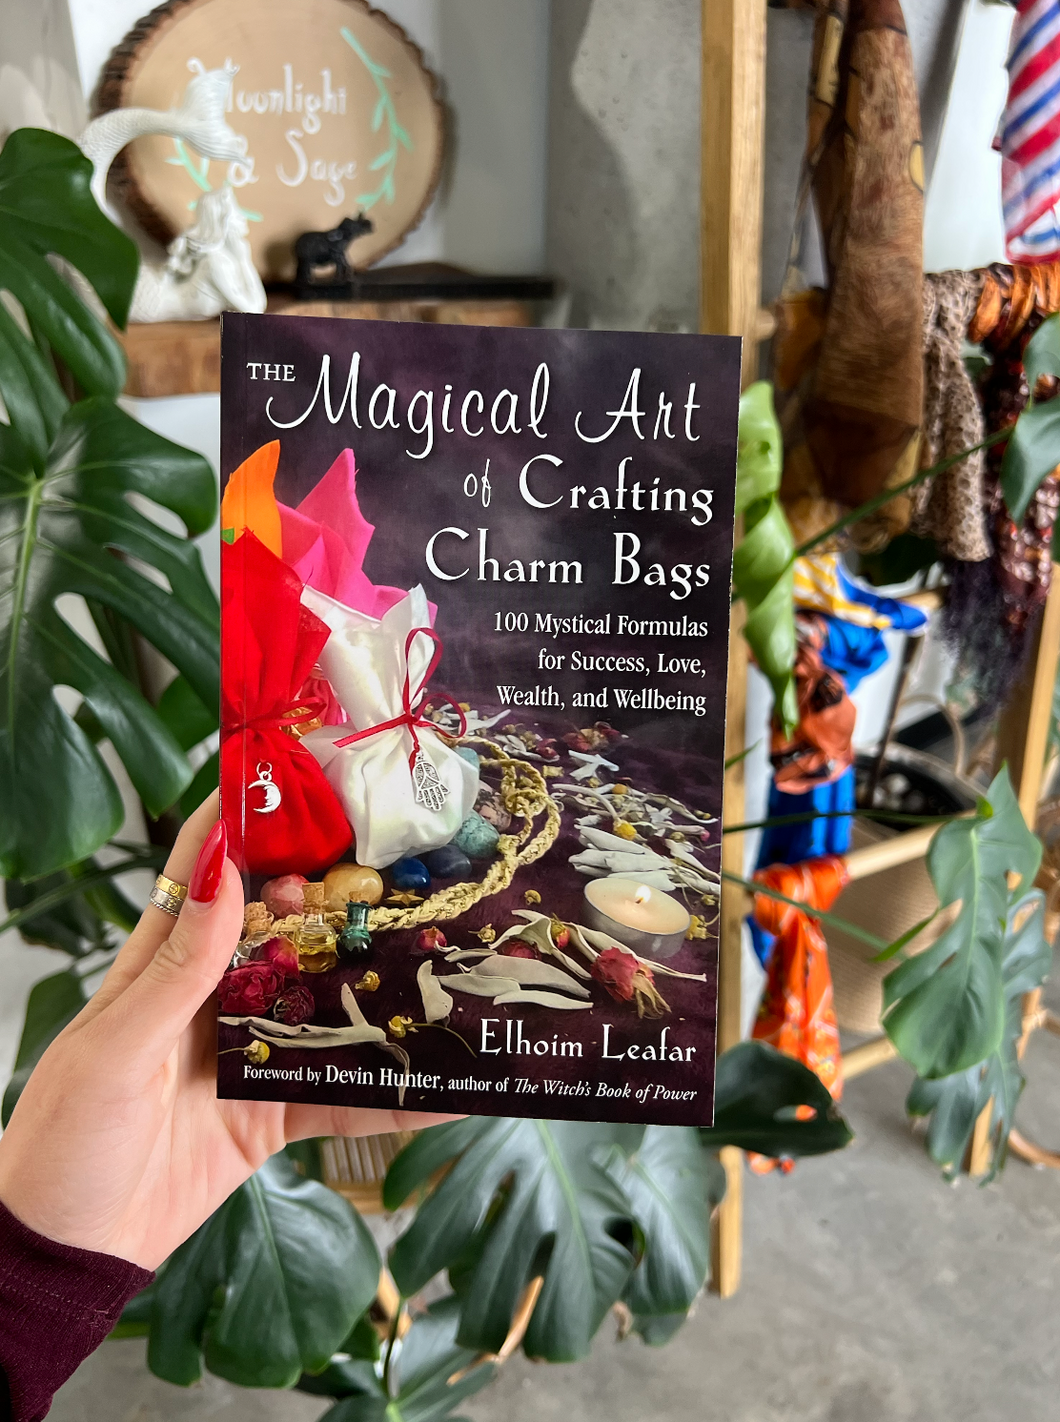 The Magical Art of Crafting Charm Bags: 100 Mystical Formulas for Success, Love, Wealth, and Wellbeing Paperback Book